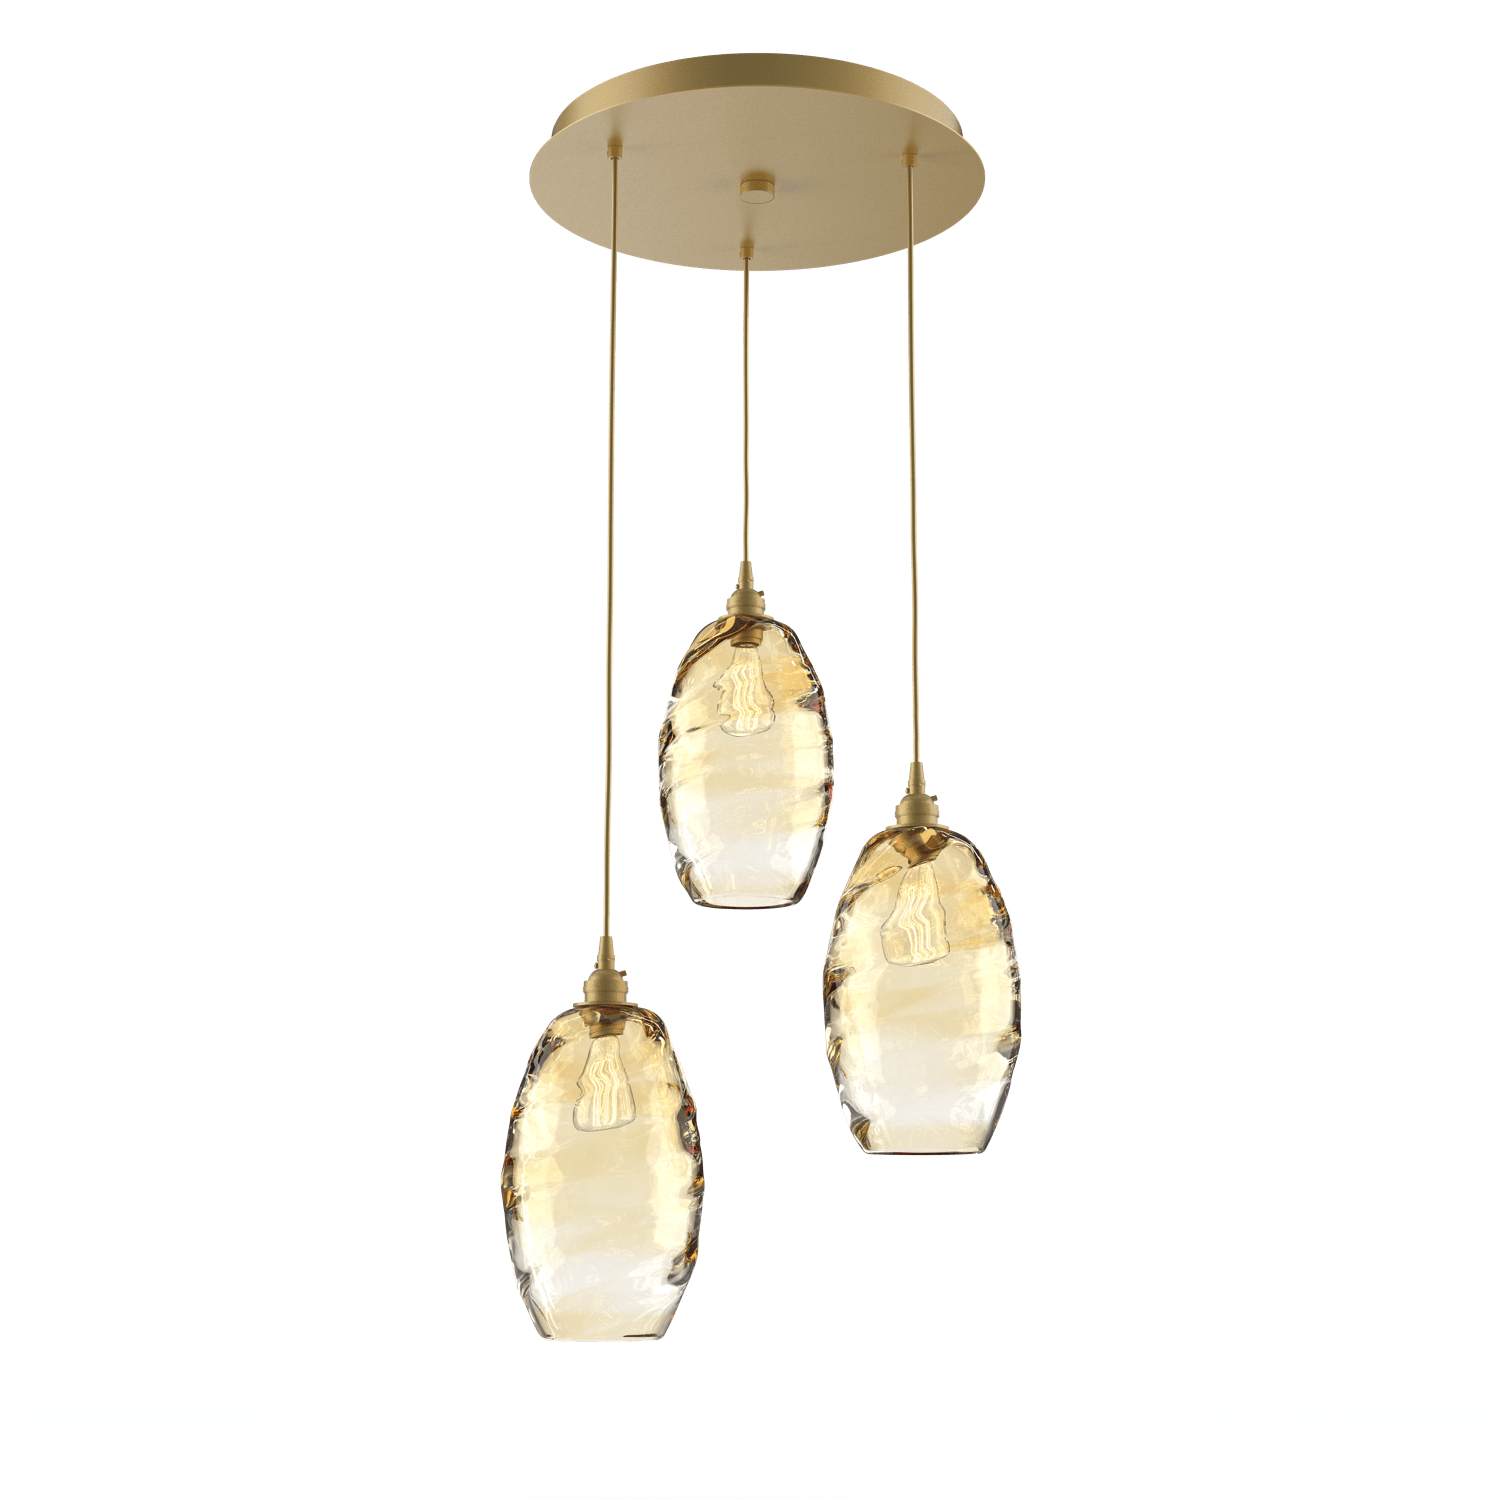 CHB0035-03-GB-OA-Hammerton-Studio-Optic-Blown-Glass-Elisse-3-light-round-pendant-chandelier-with-gilded-brass-finish-and-optic-amber-blown-glass-shades-and-incandescent-lamping